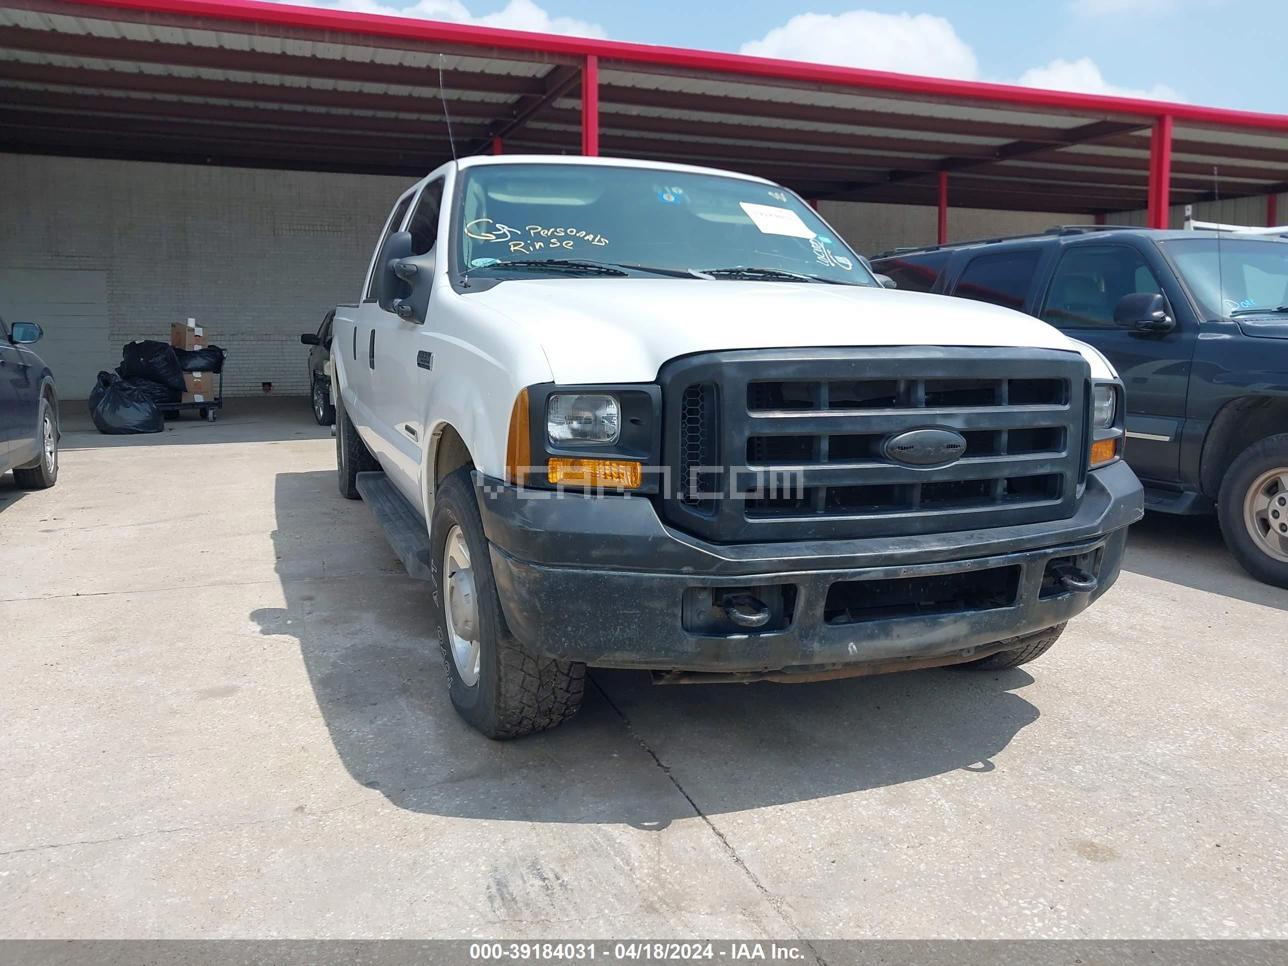 VIN: 1FTSW20P96EB42357 - ford f250